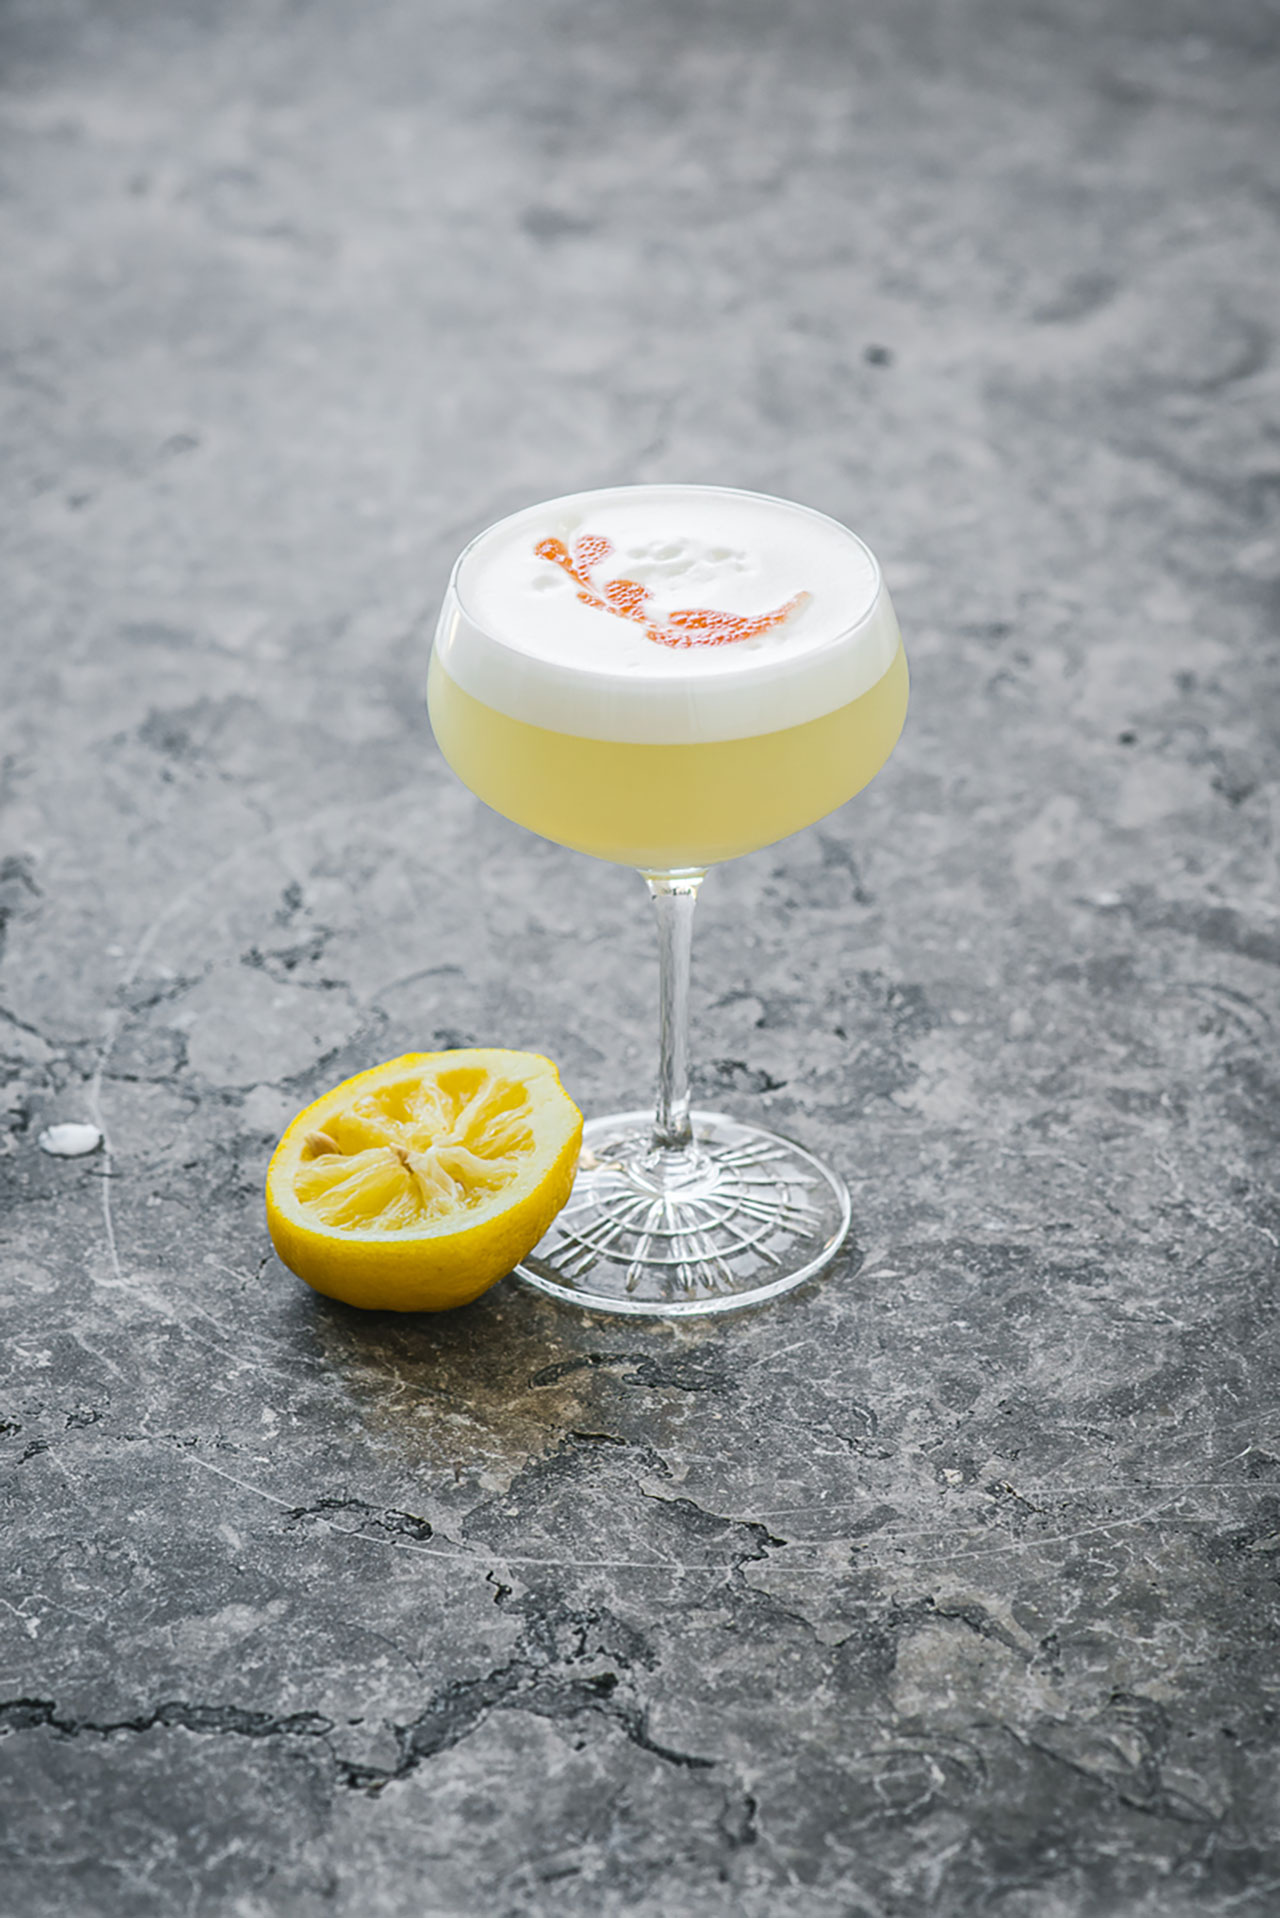 Try a buttermilk cocktail that will melt in your mouth - Grazia